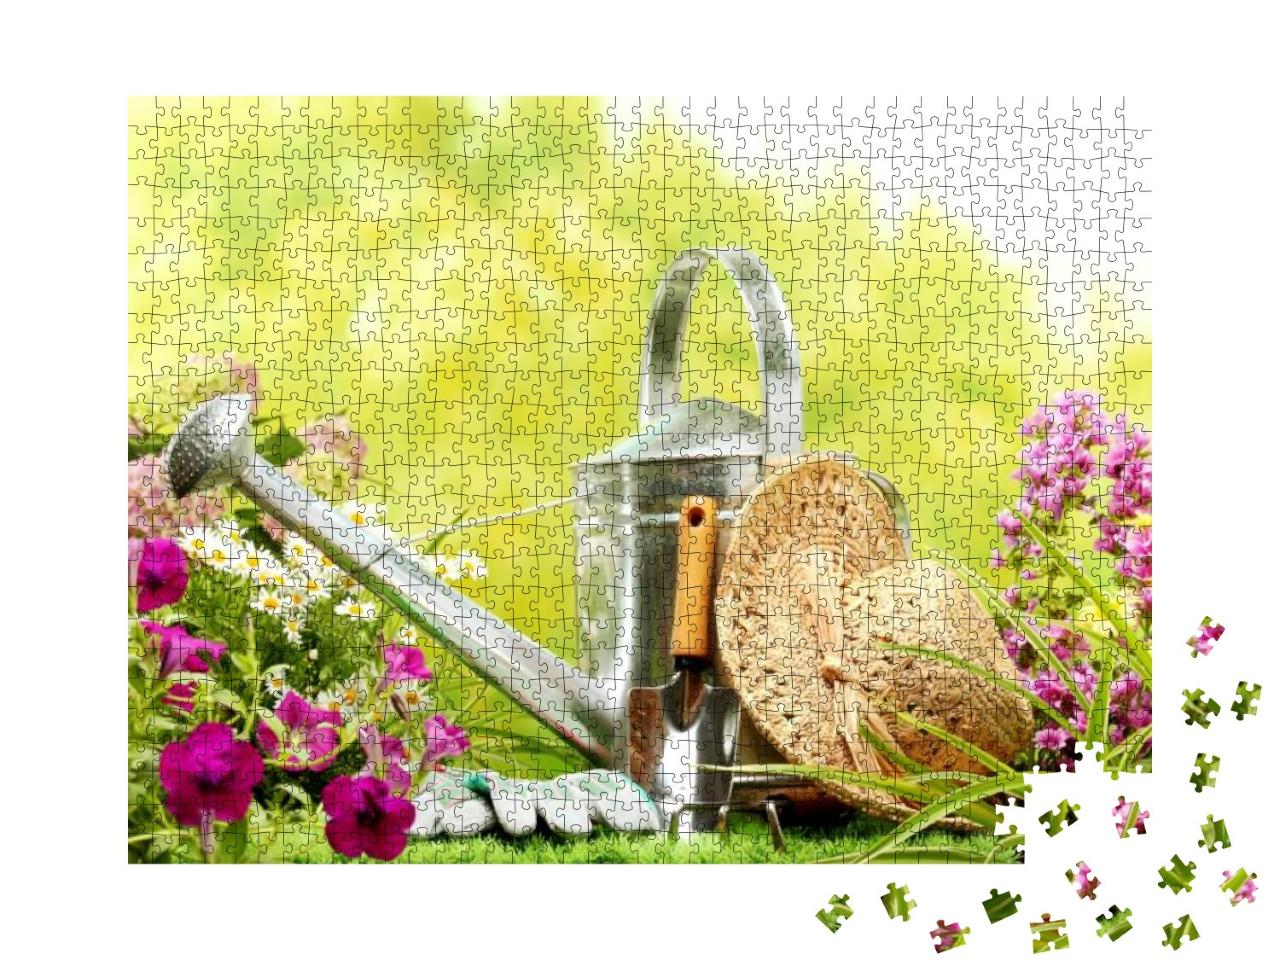 Outdoor Gardening Tools & Flowers... Jigsaw Puzzle with 1000 pieces